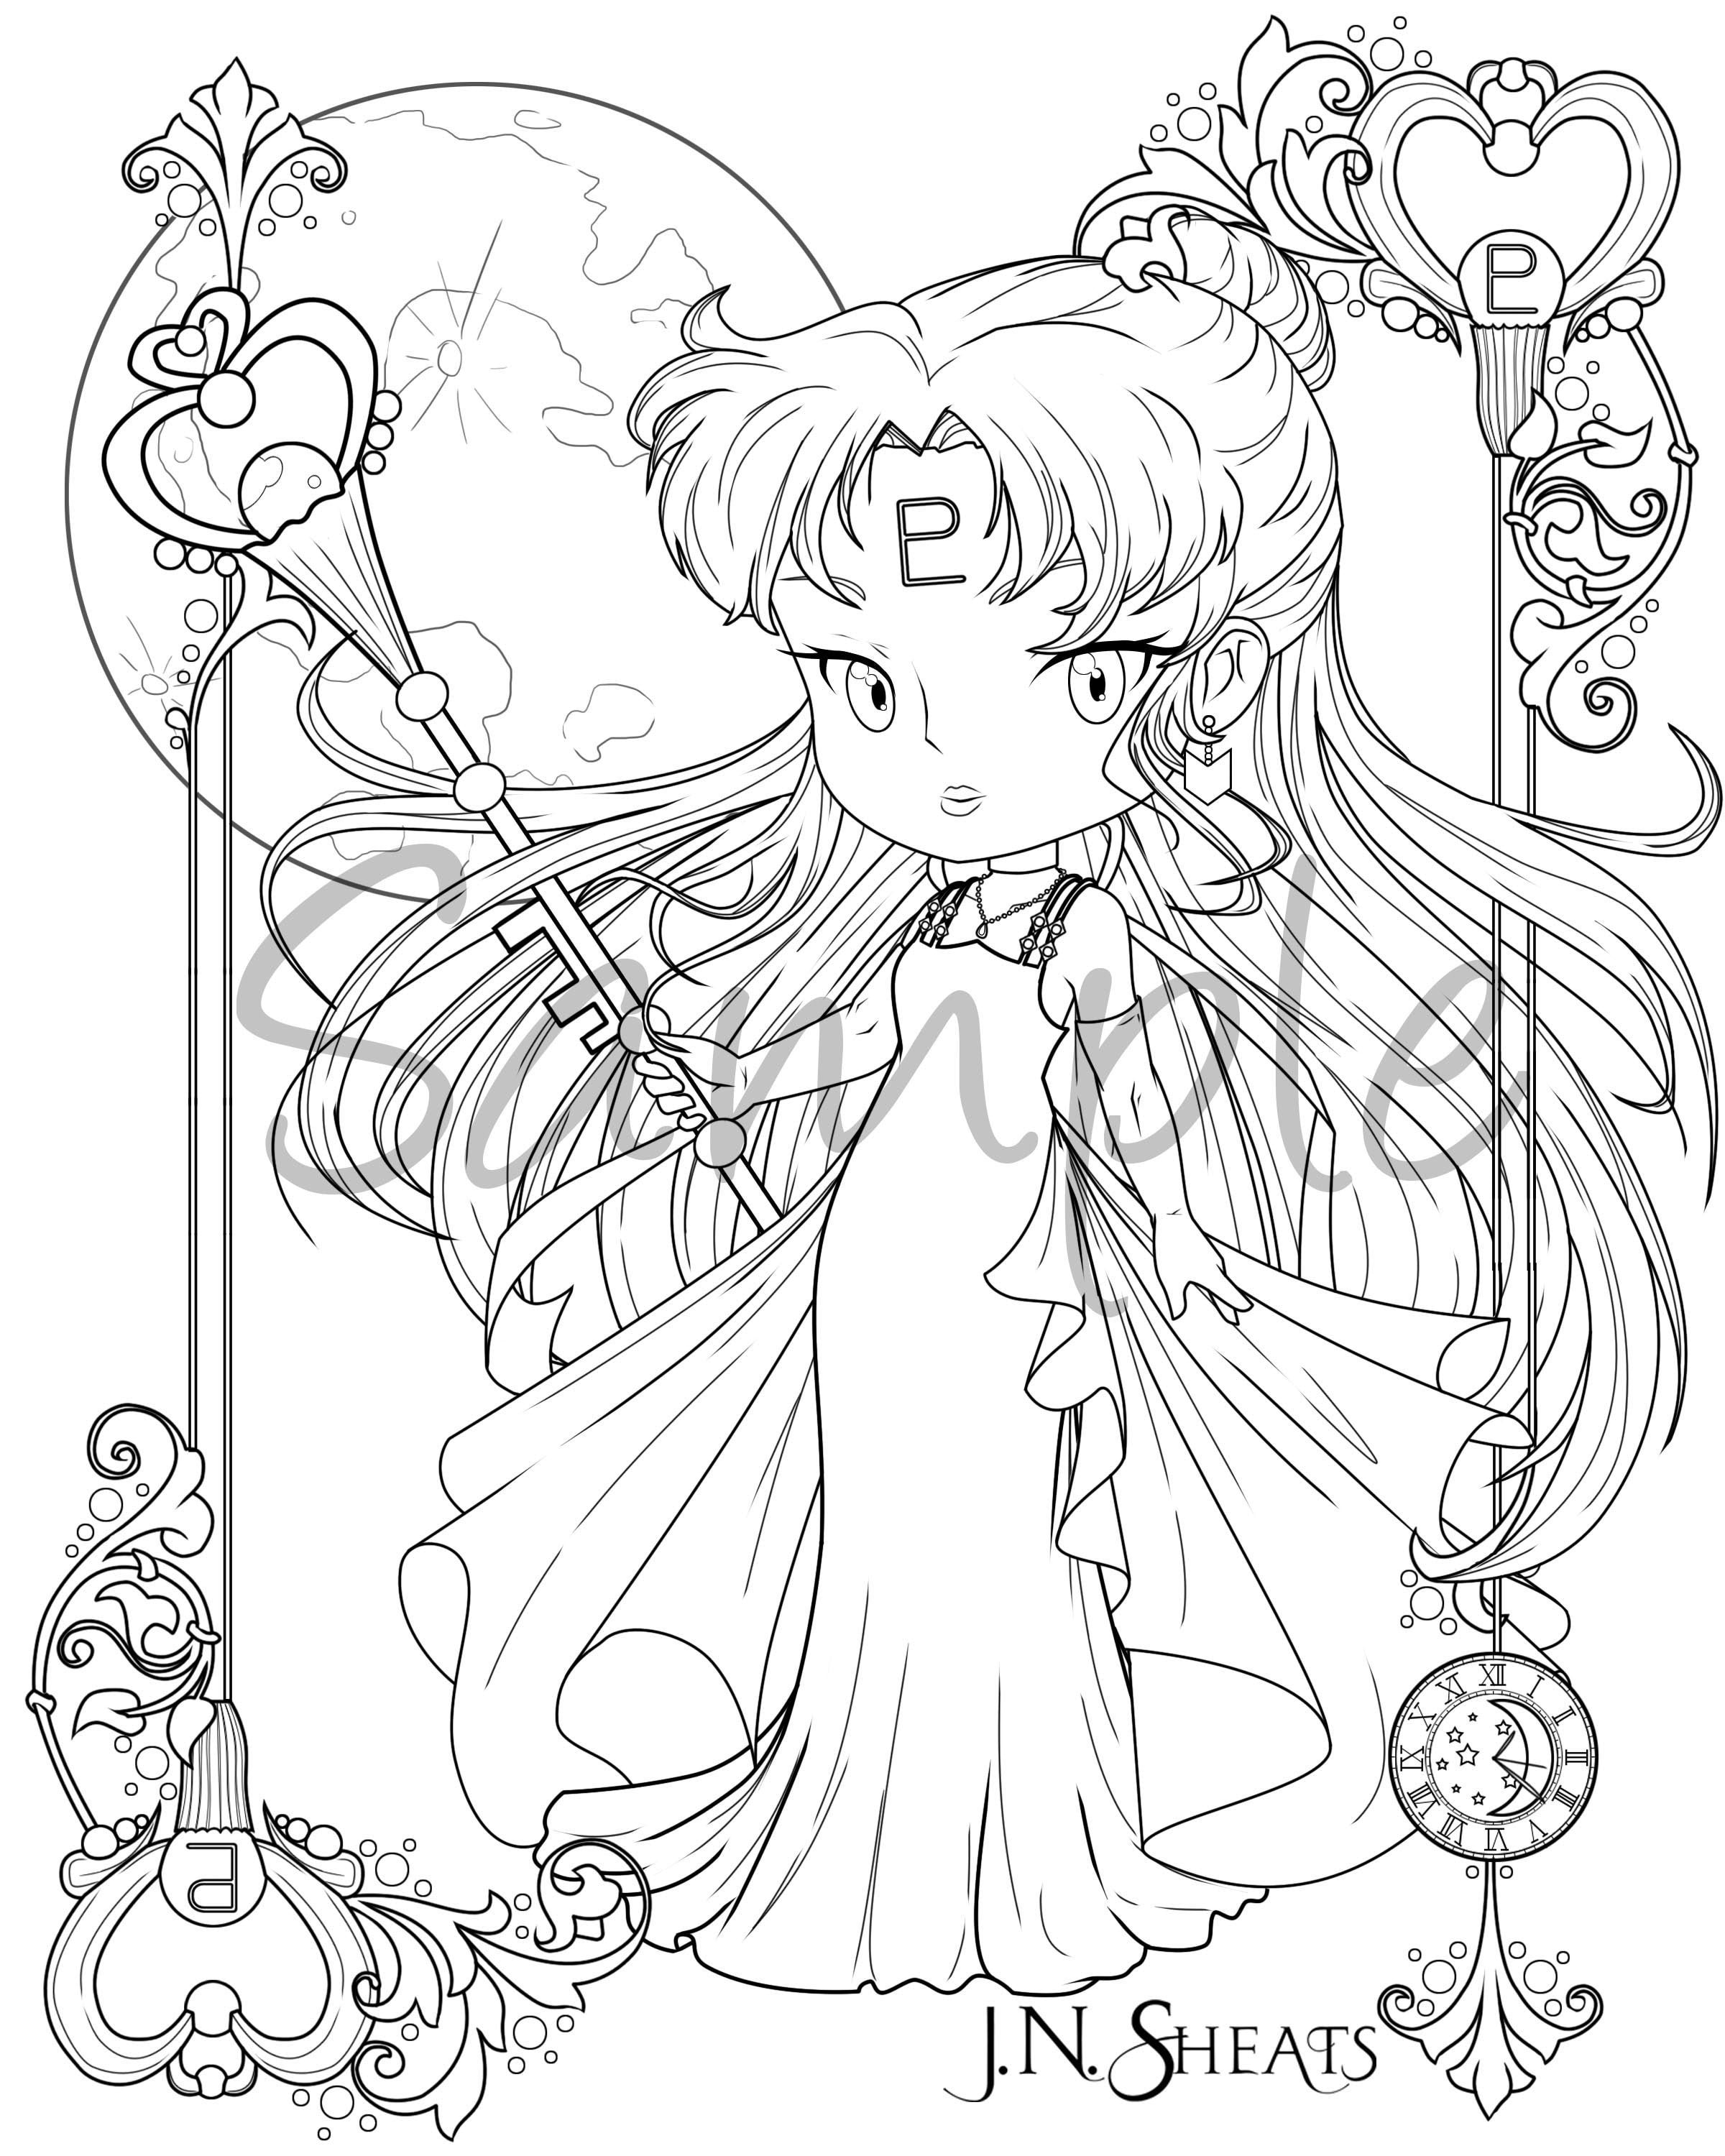 Single coloring page download for adults sailor princess pluto sailor moon instant download